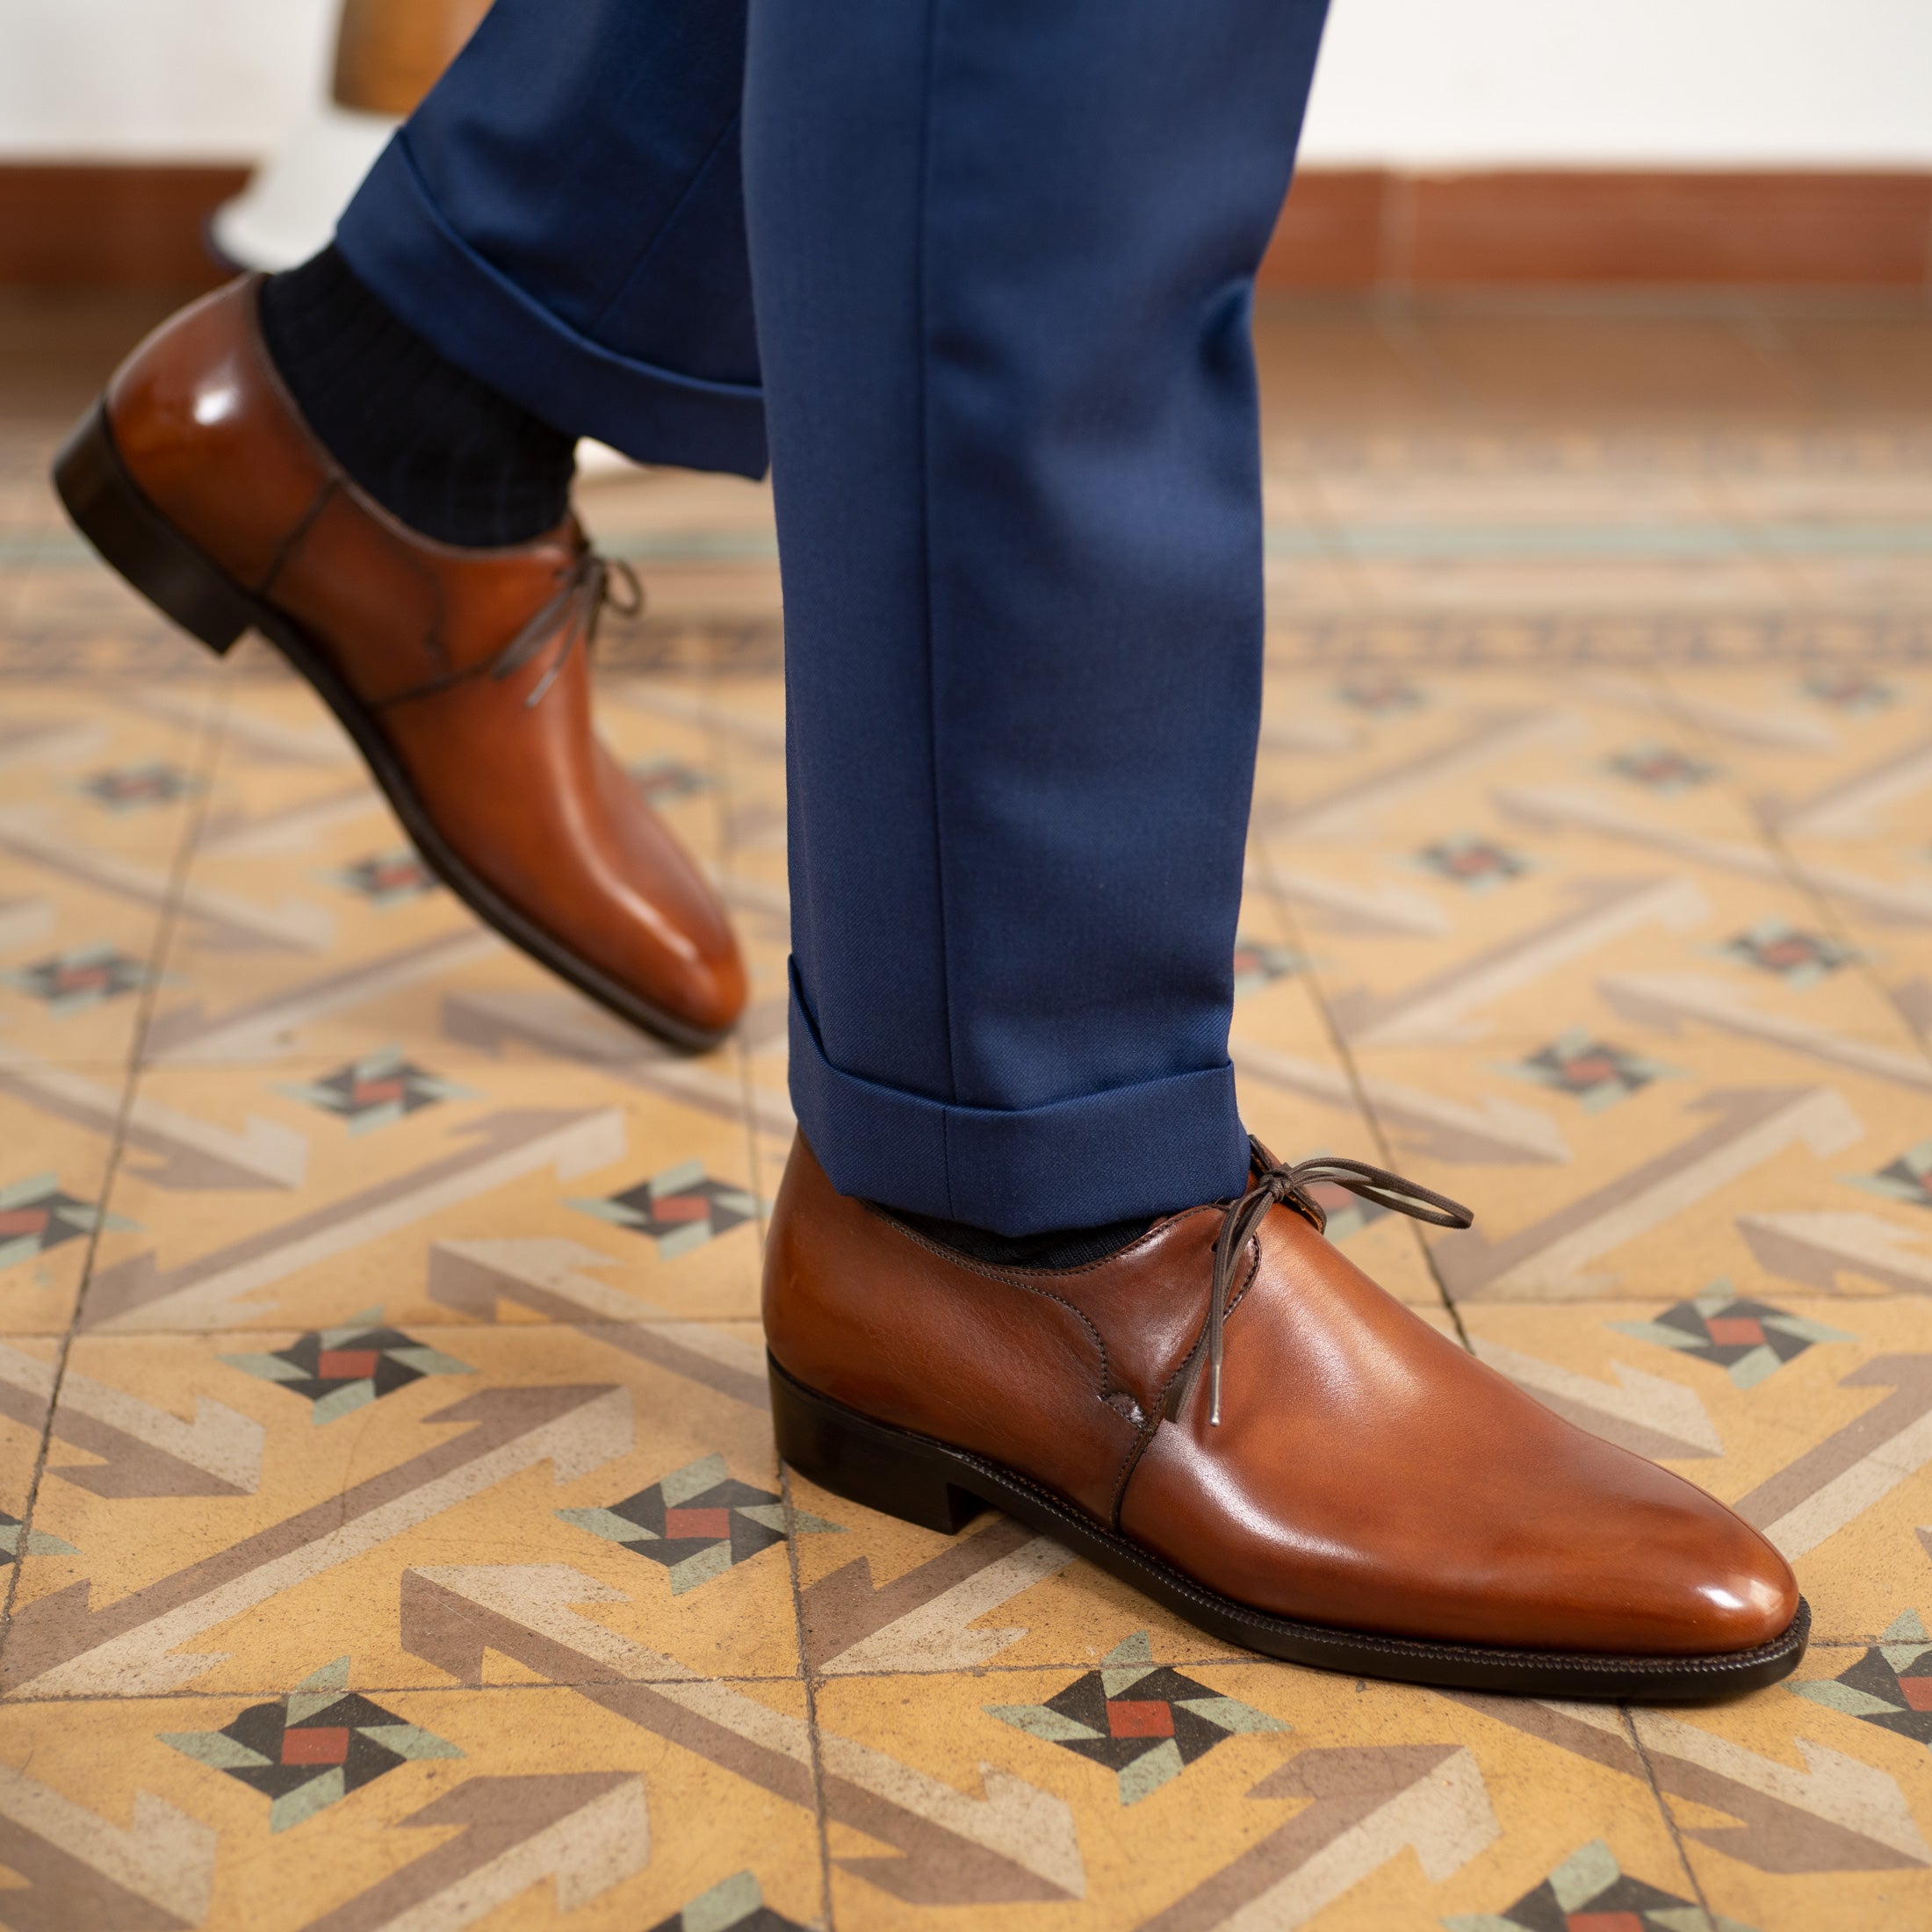 Clean and Simple | Norman Vilalta Bespoke Shoemakers